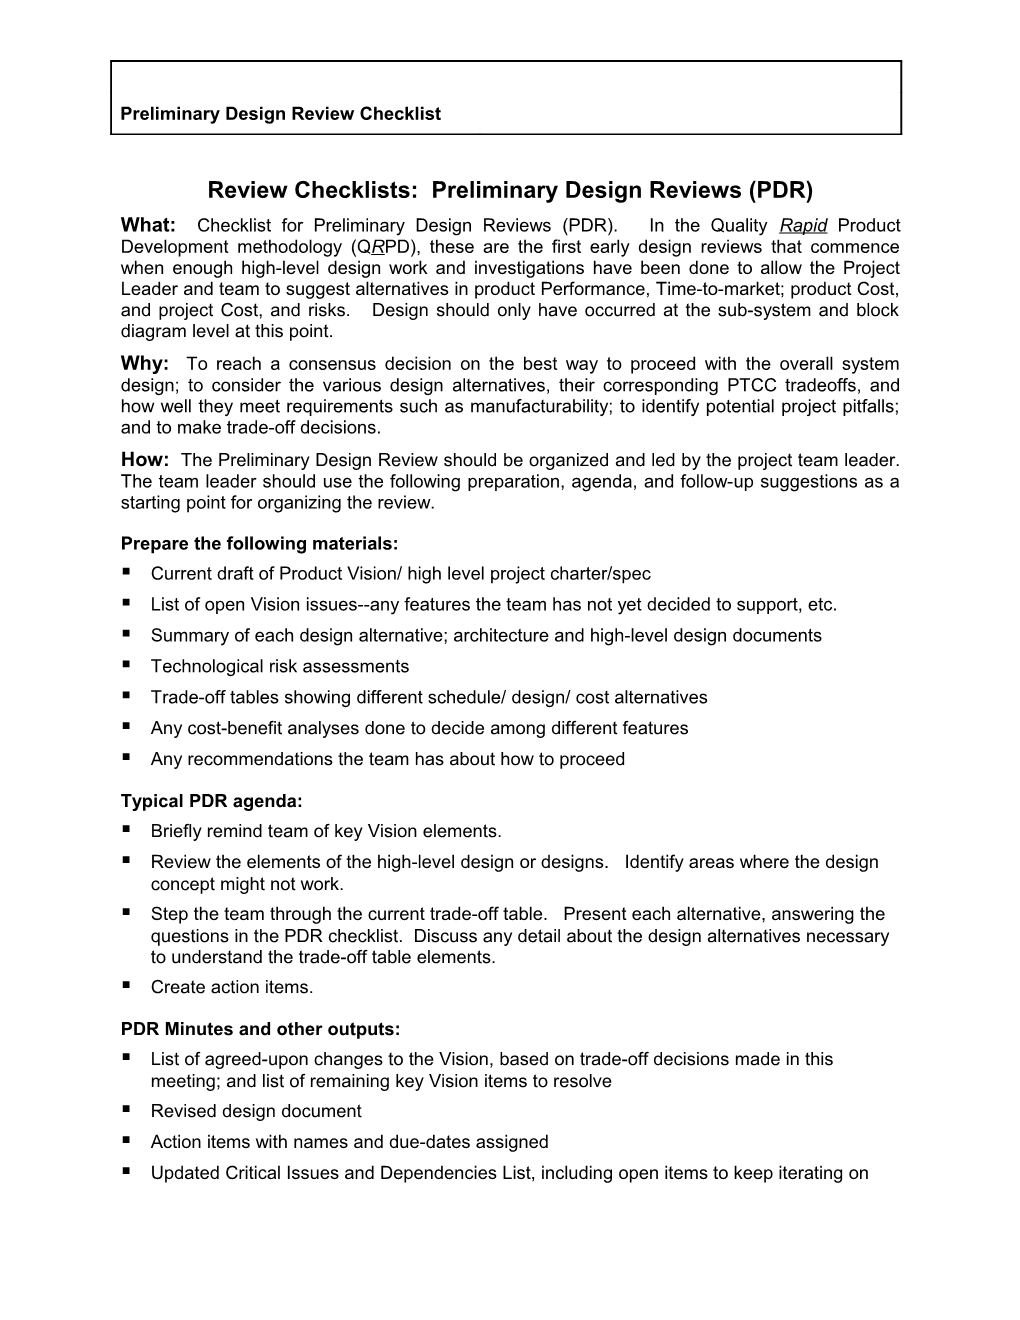 Review Checklists: Preliminary Design Reviews (PDR)